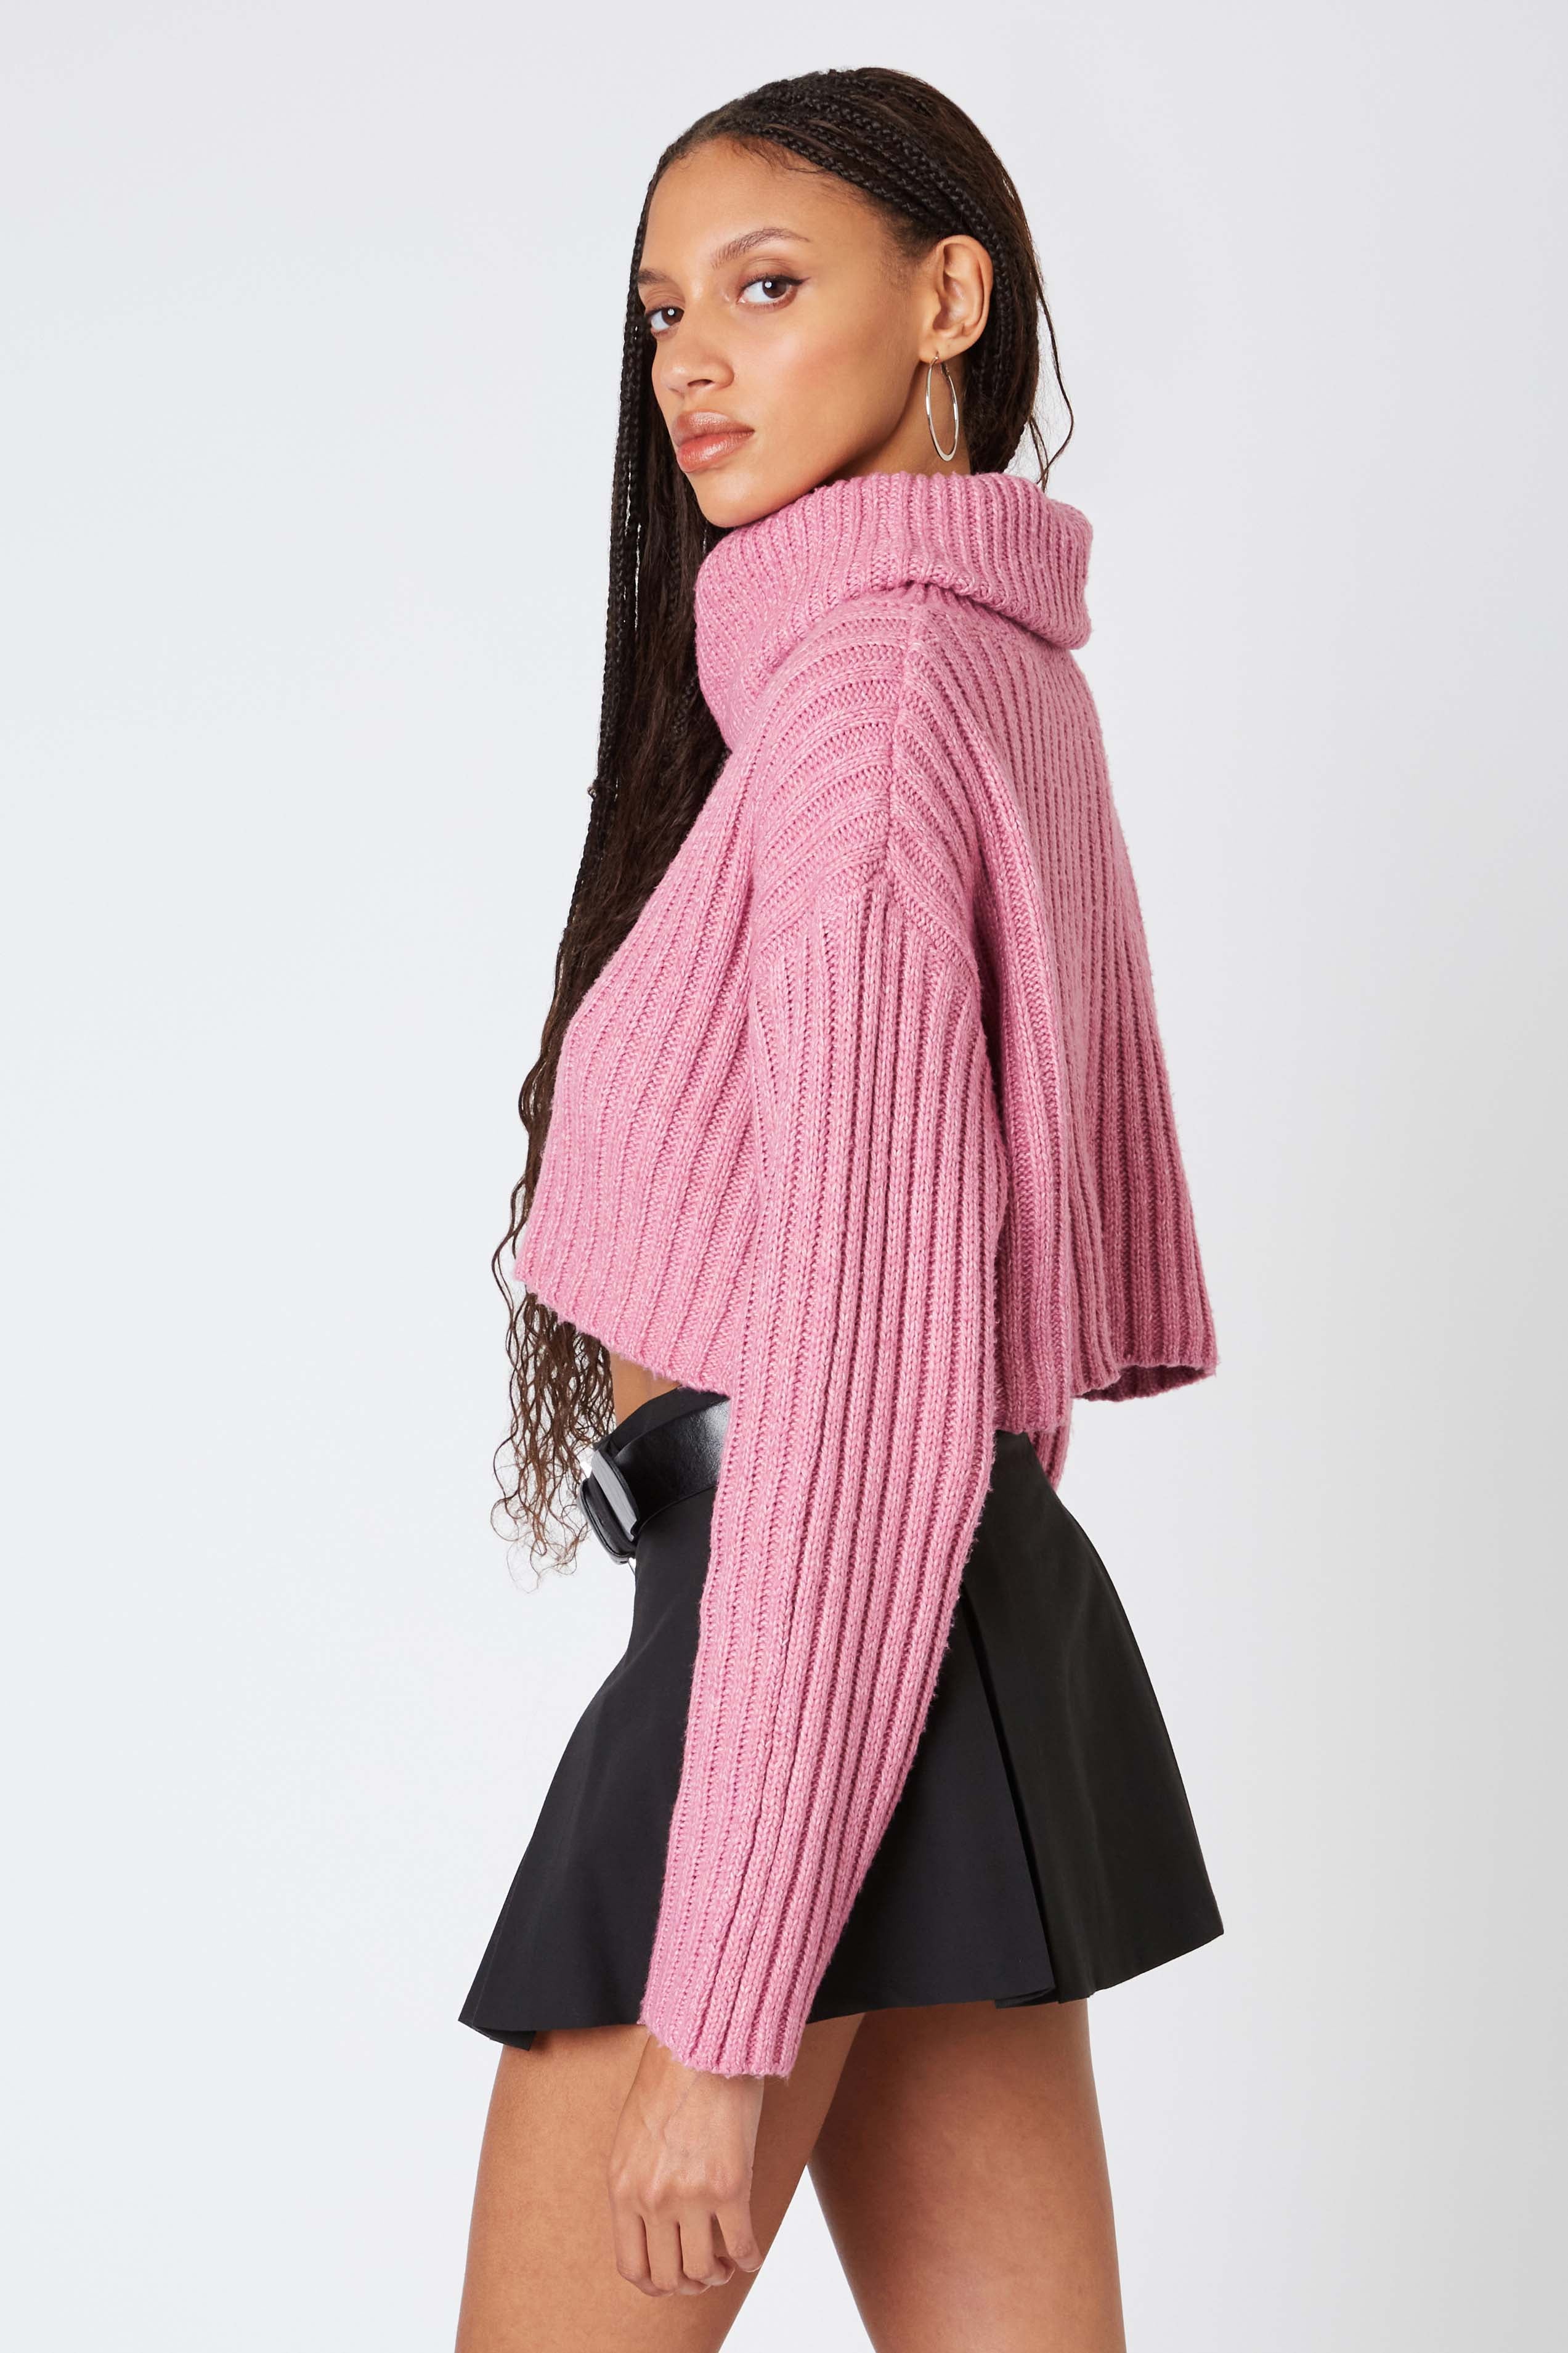 Cropped Turtleneck Sweater in Mauve Back View